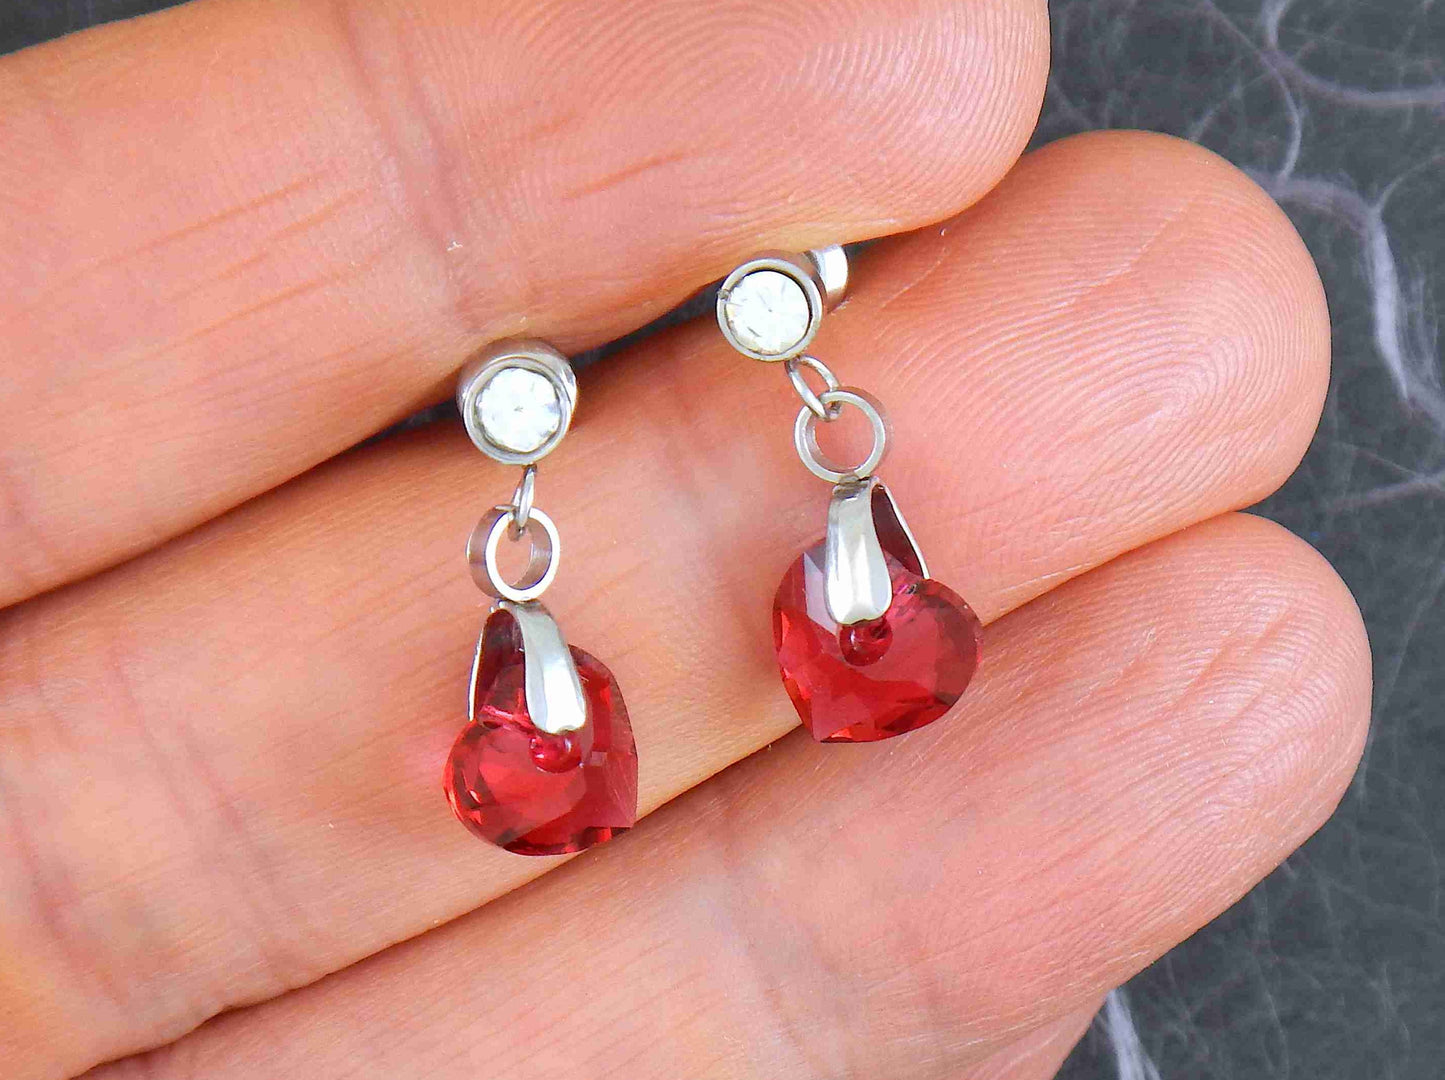 Short earrings with 8mm Scarlet (deep red) faceted Swarovski crystal hearts, stainless steel studs with tiny crystals